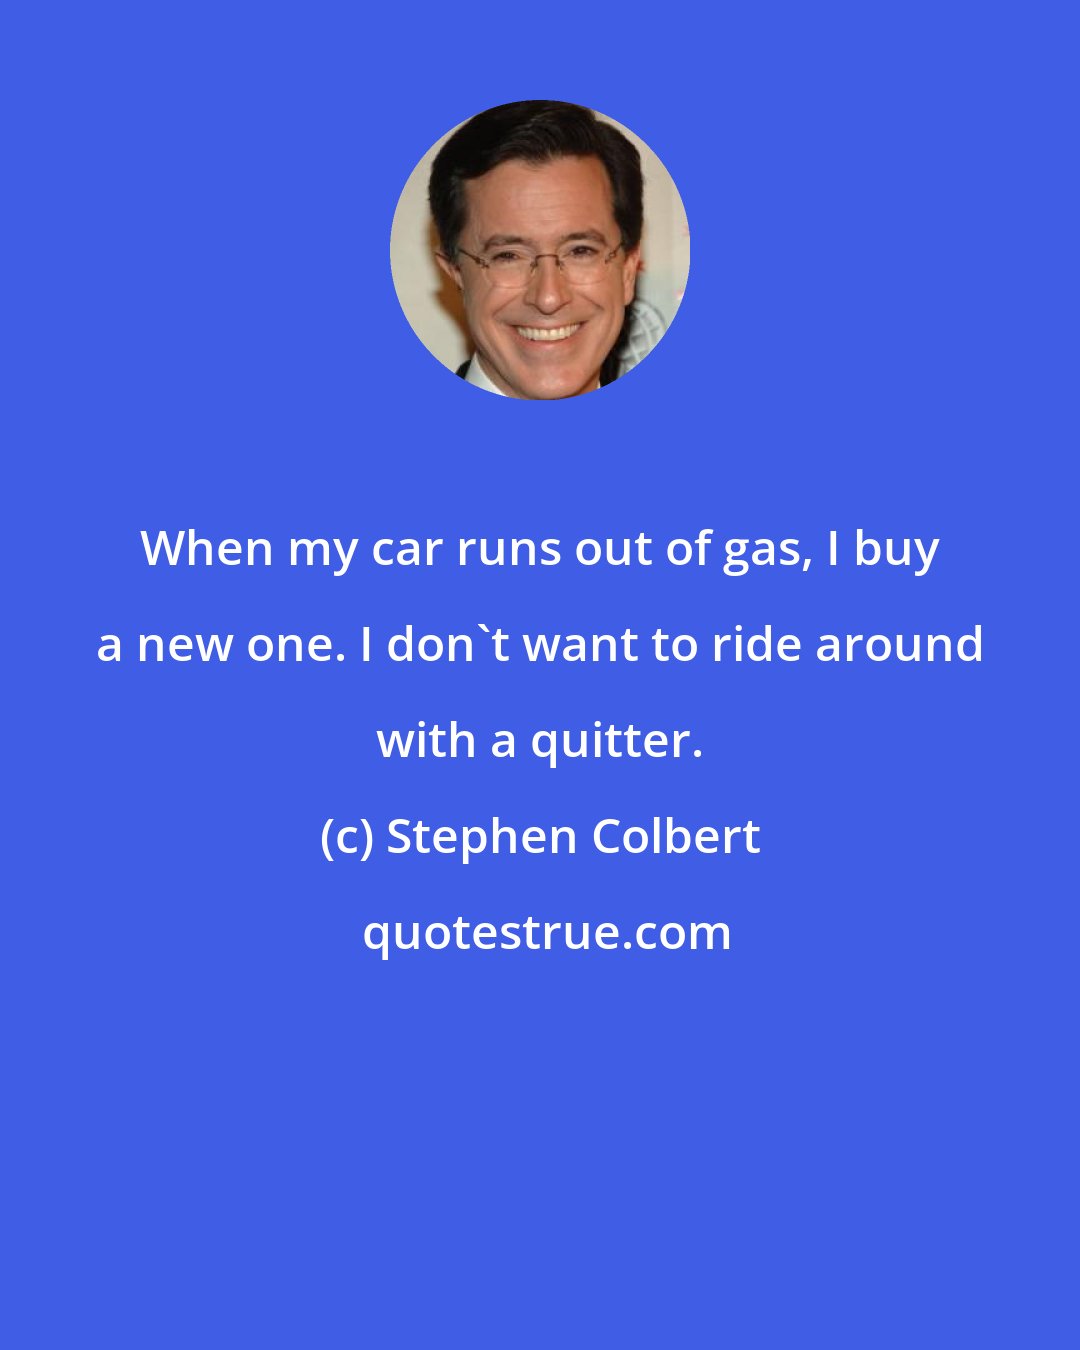 Stephen Colbert: When my car runs out of gas, I buy a new one. I don't want to ride around with a quitter.